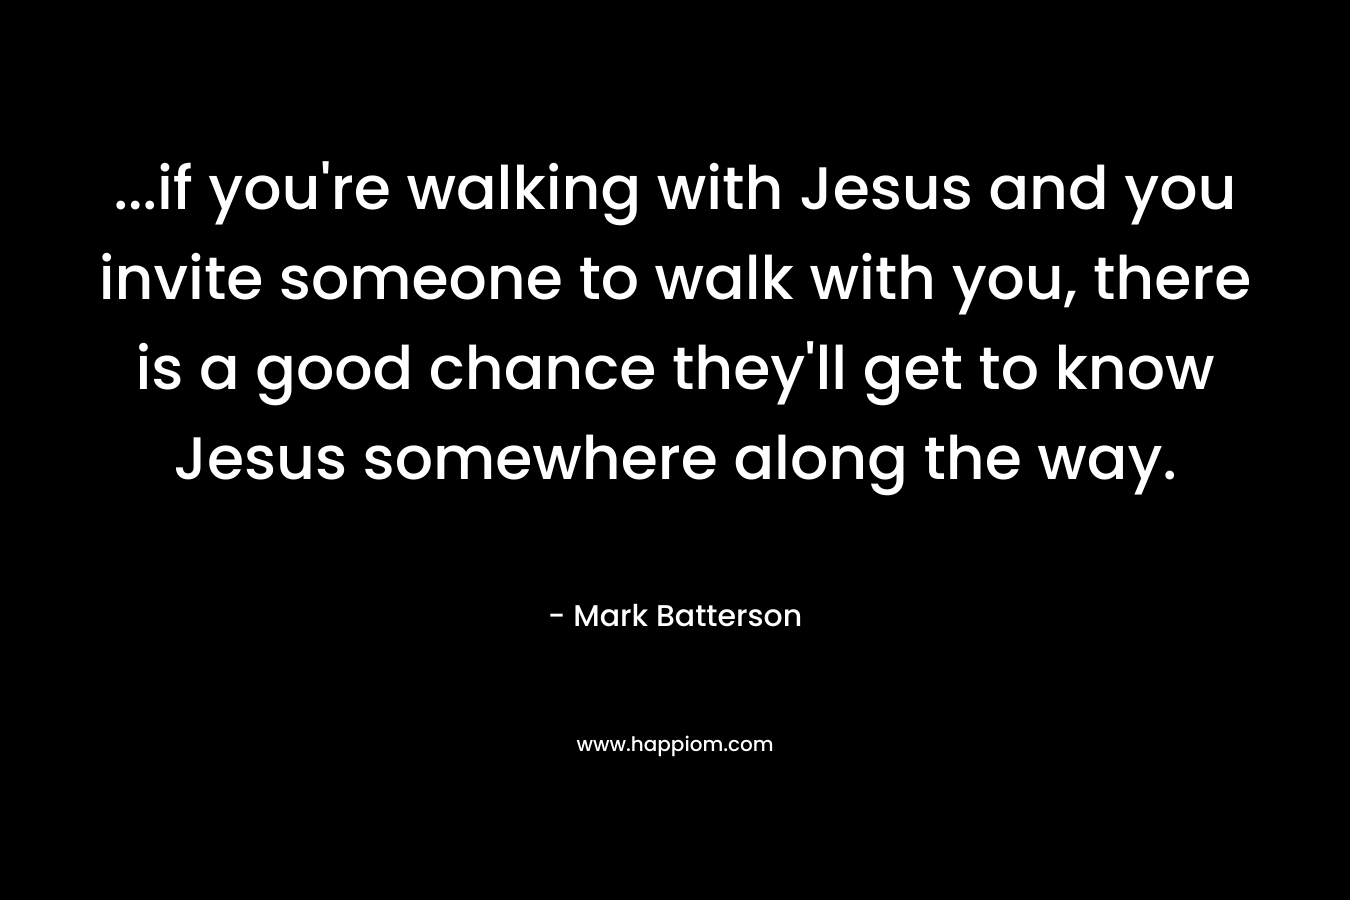 ...if you're walking with Jesus and you invite someone to walk with you, there is a good chance they'll get to know Jesus somewhere along the way.